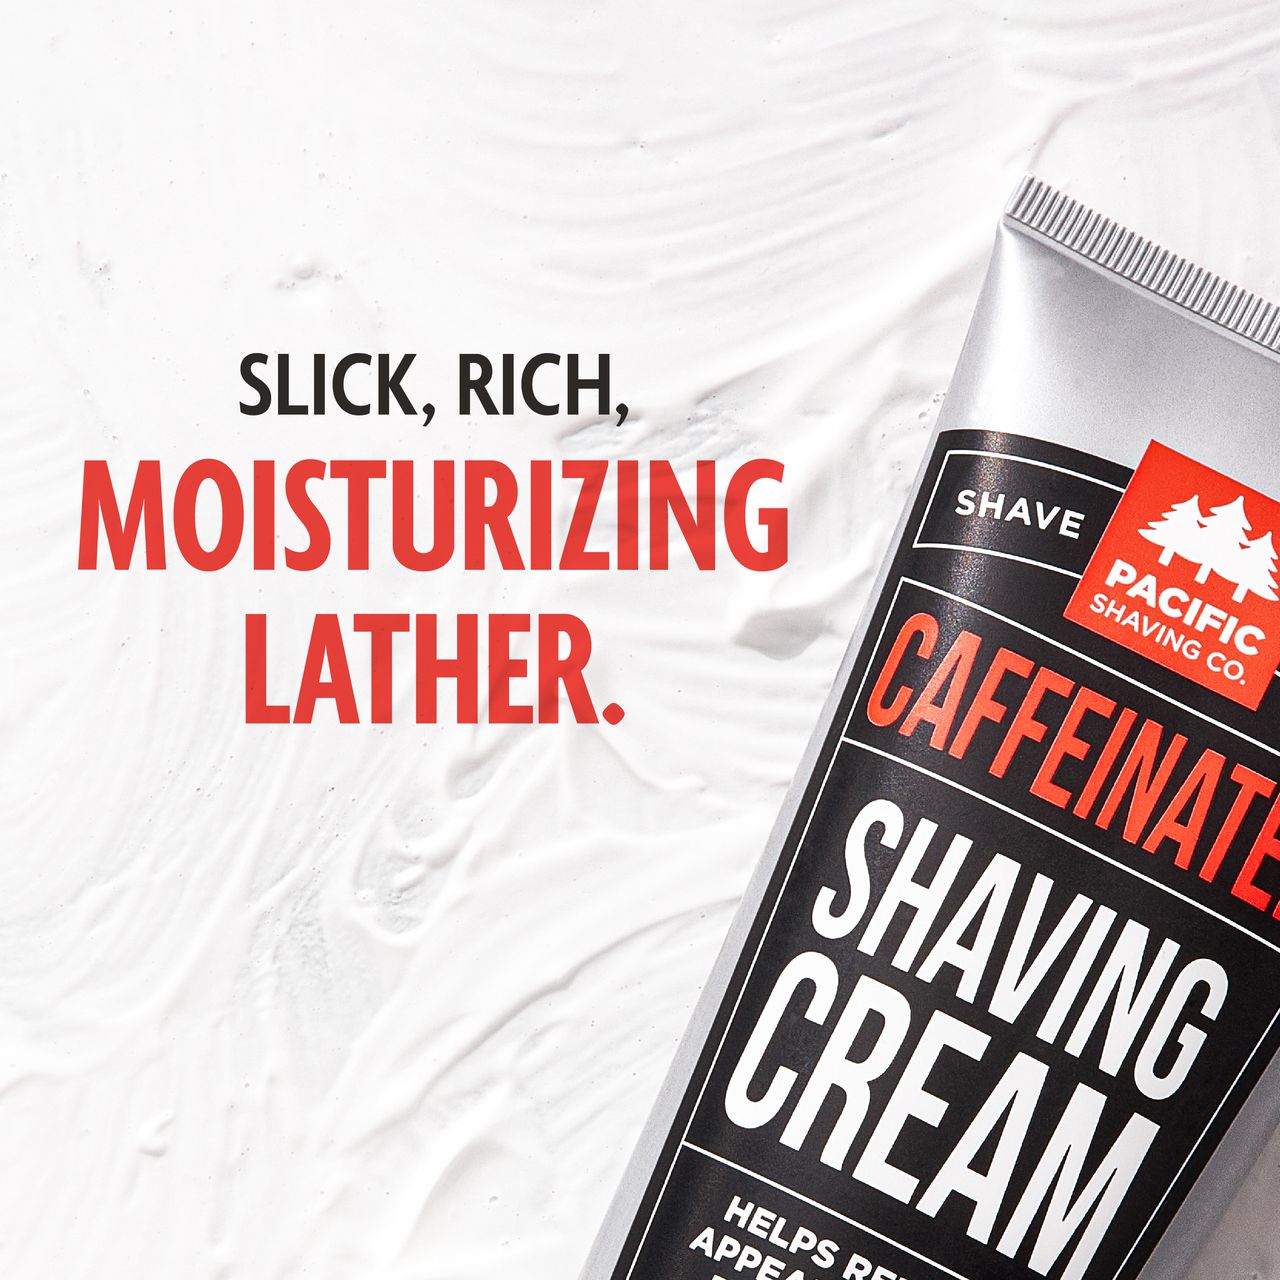 Caffeinated Shaving Cream by Pacific Shaving Company. This outstanding aftershave moisturizer utilizes the many benefits of naturally-derived caffeine to help liven up your morning shave routine. It will give you an exceptional shave, help reduce the appearance of redness, and keep your skin looking and feeling healthy all day. It may not replace your morning coffee, but it will give a little extra kick to your morning routine. A little goes a long way.